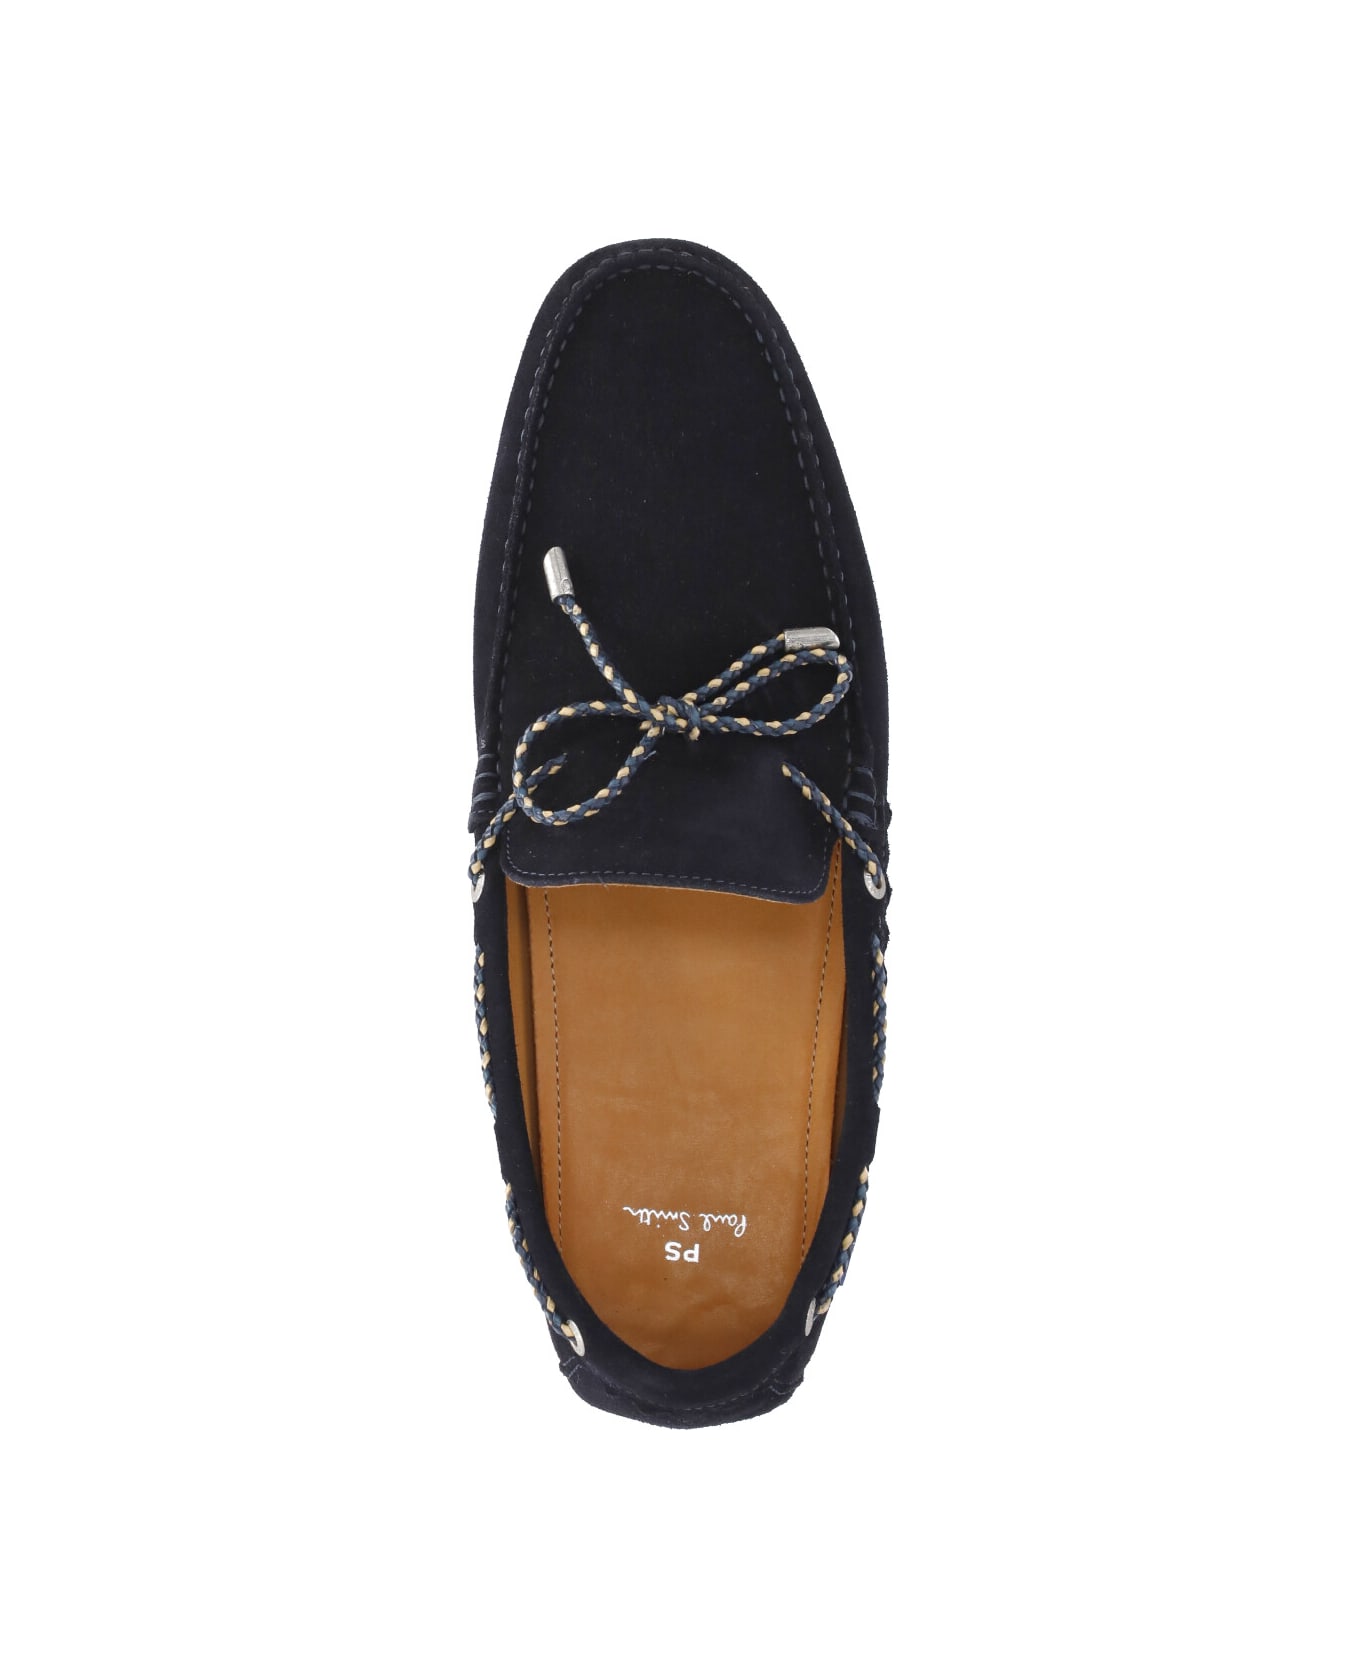 Paul Smith Springfield Suede Leather Loafers - Blue